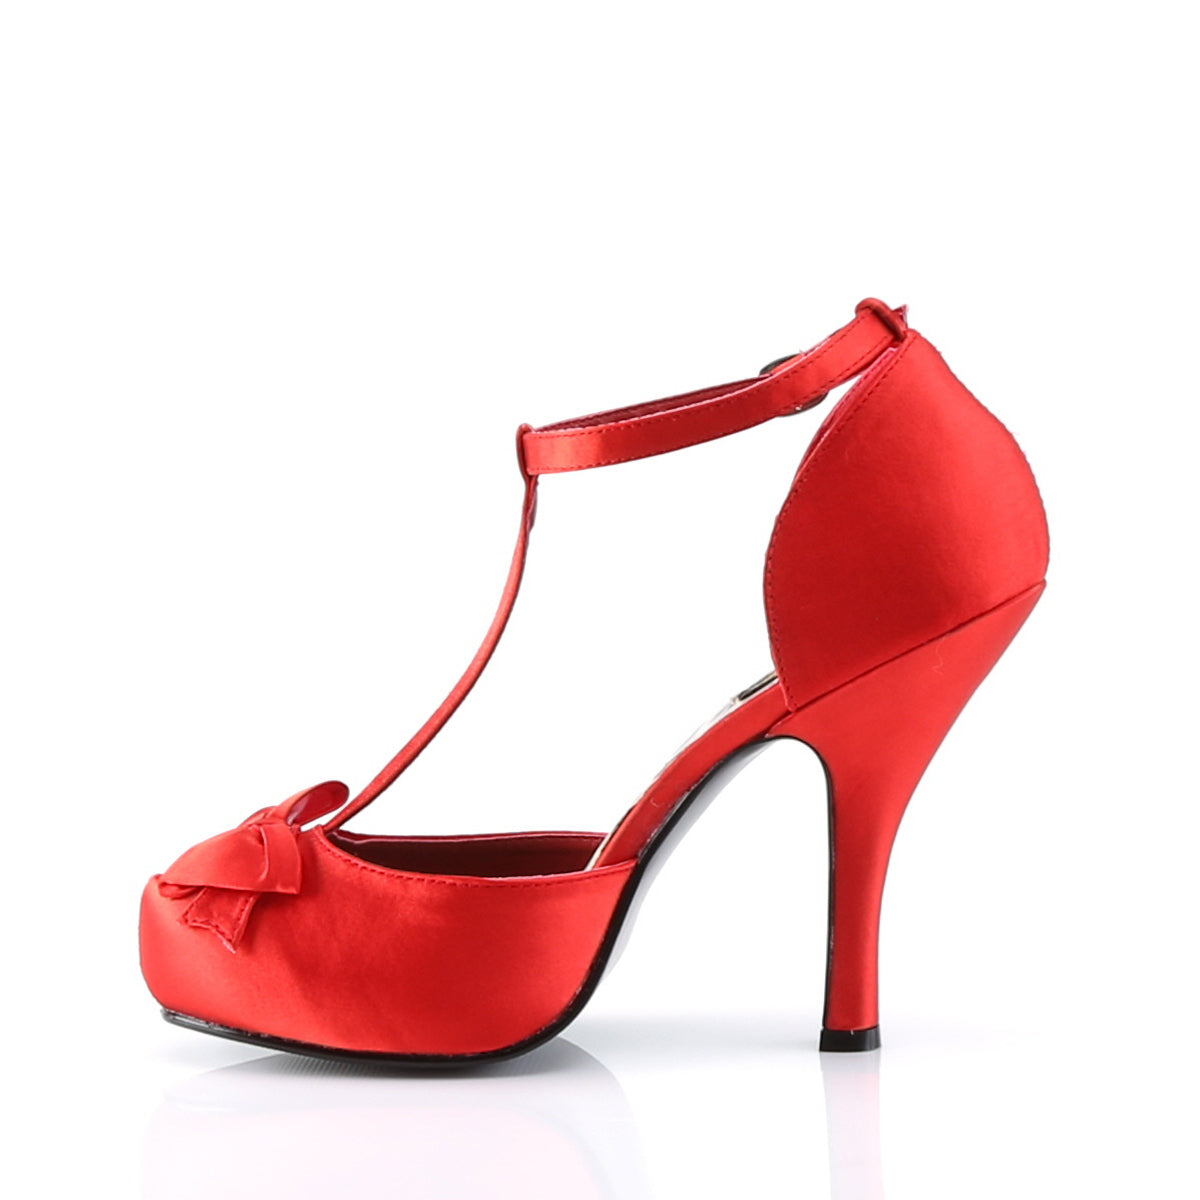 CUTIEPIE-12 Pin Up Couture Red Satin Platforms [Retro Glamour Shoes]